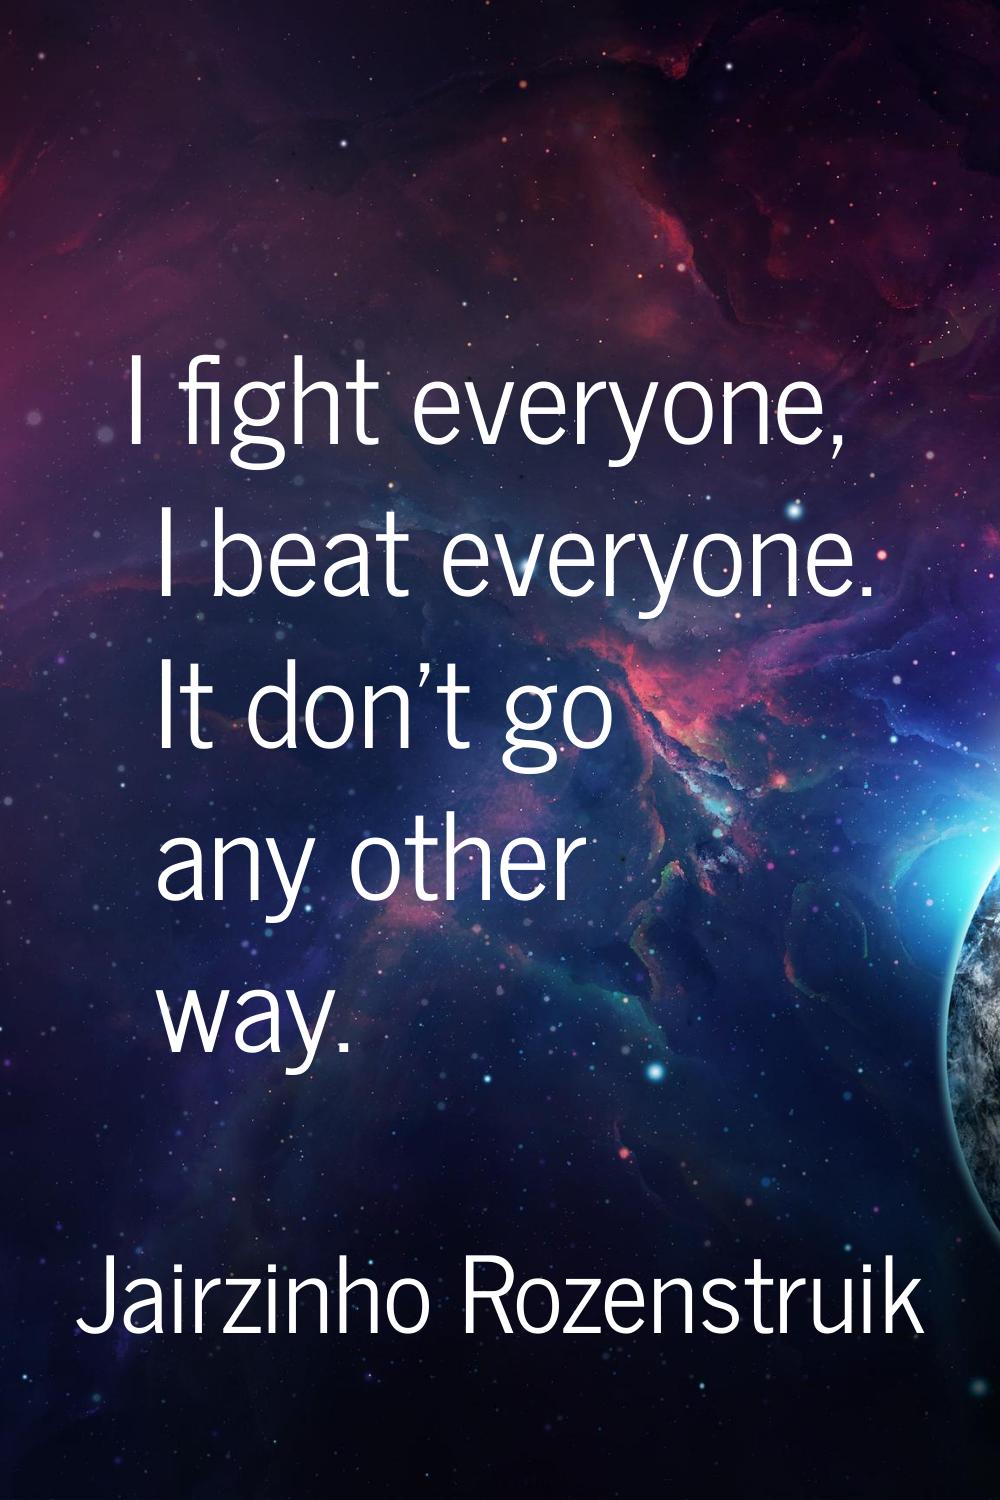 I fight everyone, I beat everyone. It don't go any other way.